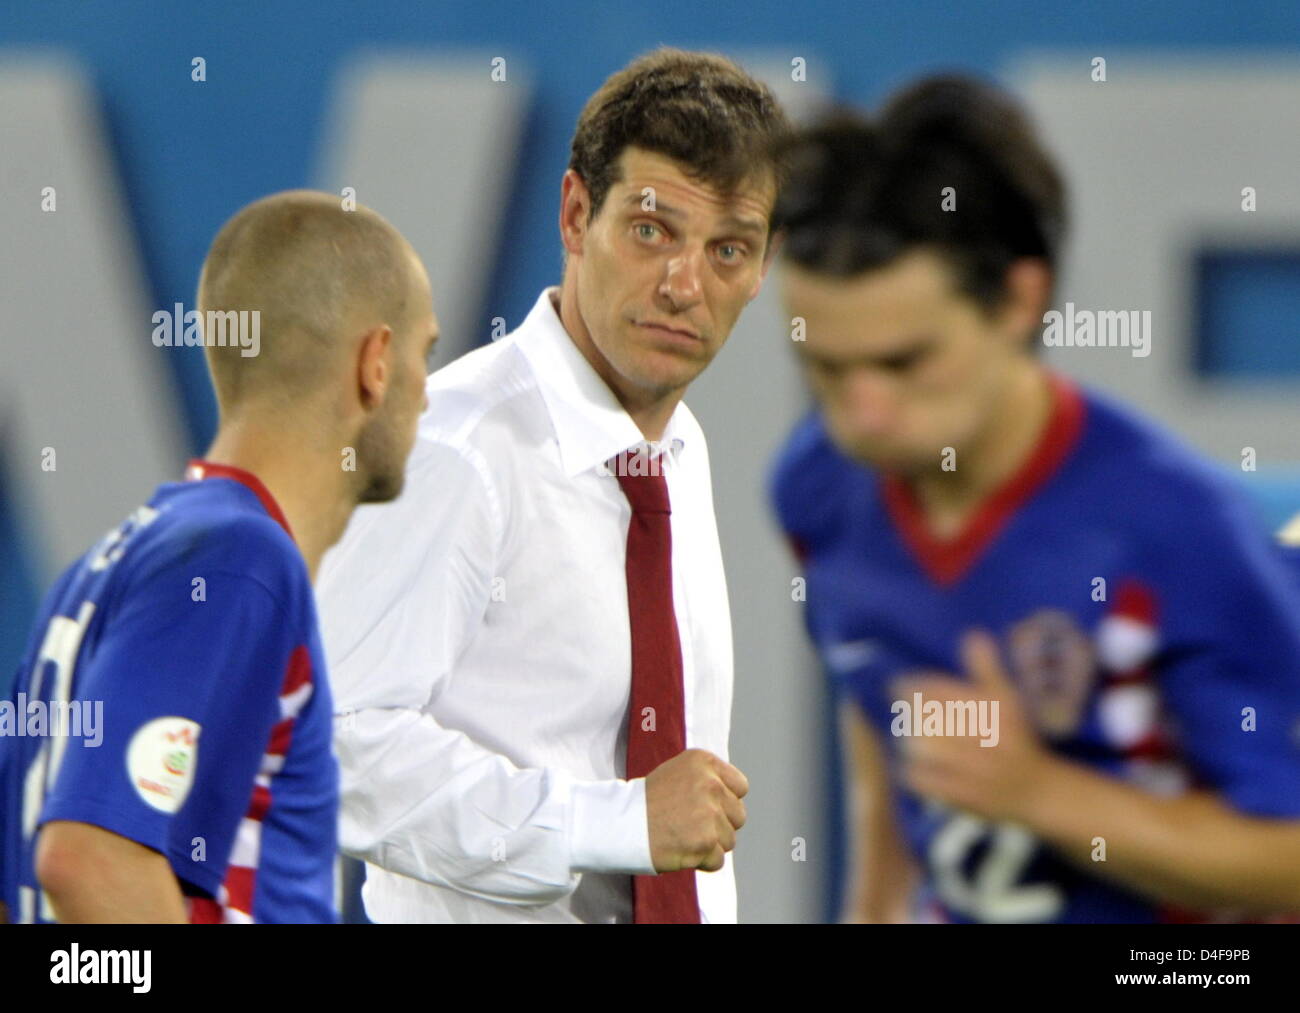 Head Coach Slaven Bilic of Croatia (C) ecourages his players after regular match time during the UEFA EURO 2008 quarter final match between Croatia and Turkey at the Ernst Happel stadium in Vienna, Austria, 20 June 2008. Photo: Achim Scheidemann dpa +please note UEFA restrictions particulary in regard to slide shows and 'No Mobile Services'+ +++(c) dpa - Bildfunk+++ Stock Photo